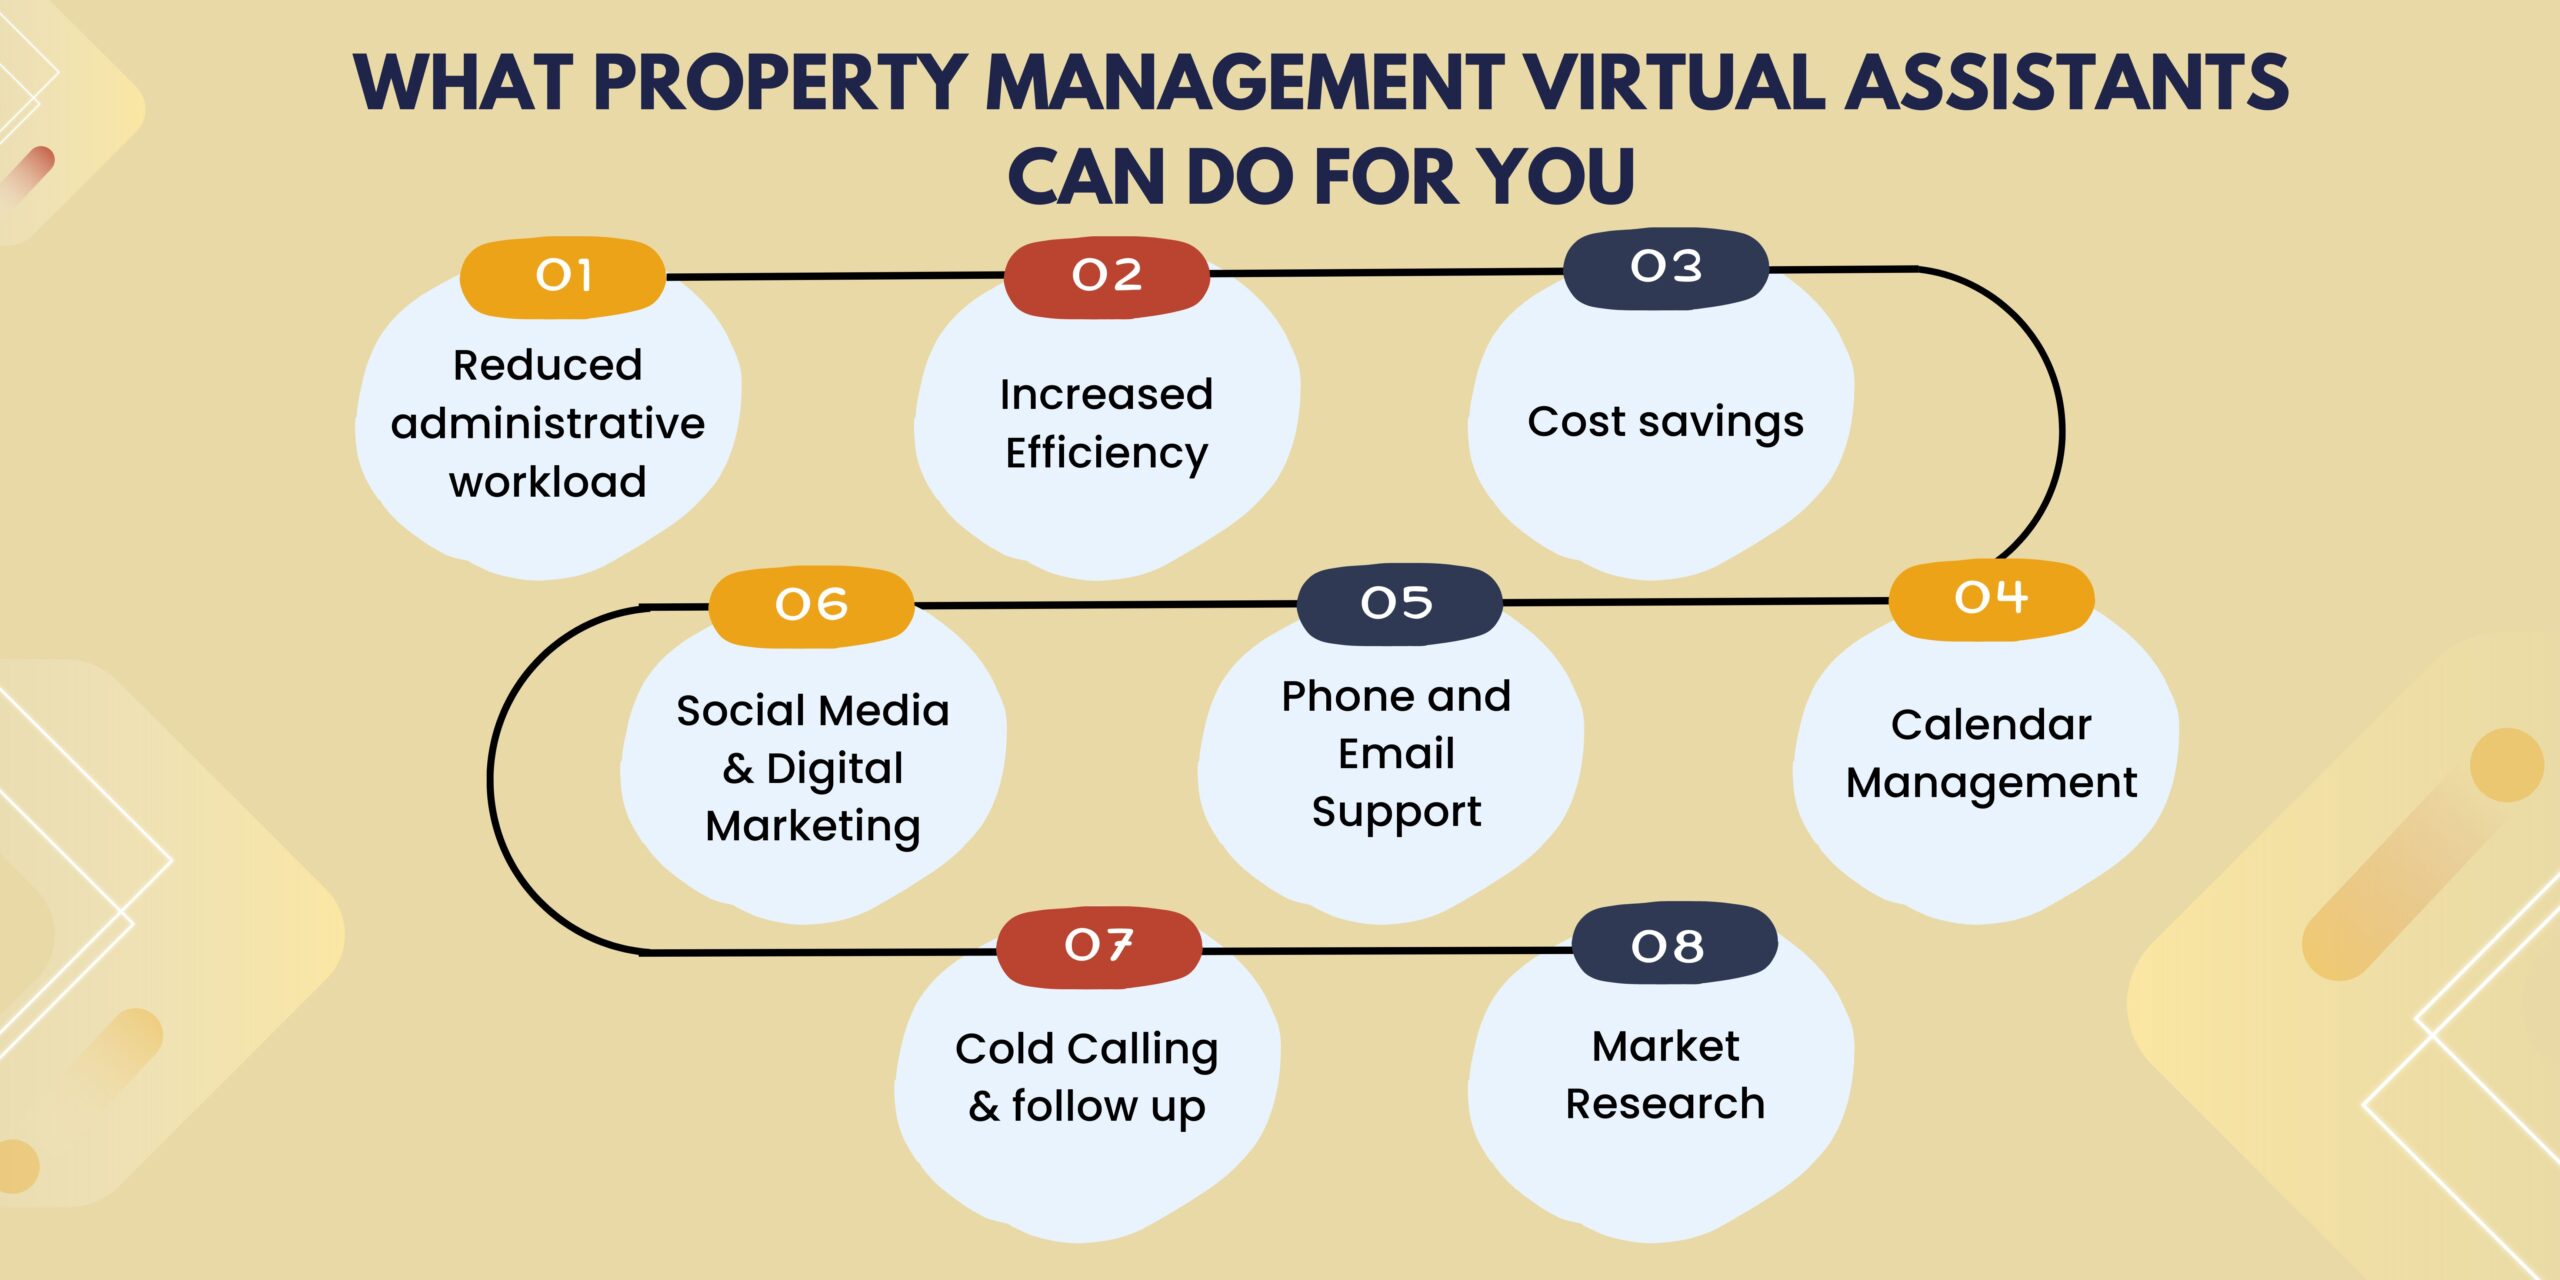 What Property Management Virtual Assistants Can Do For You